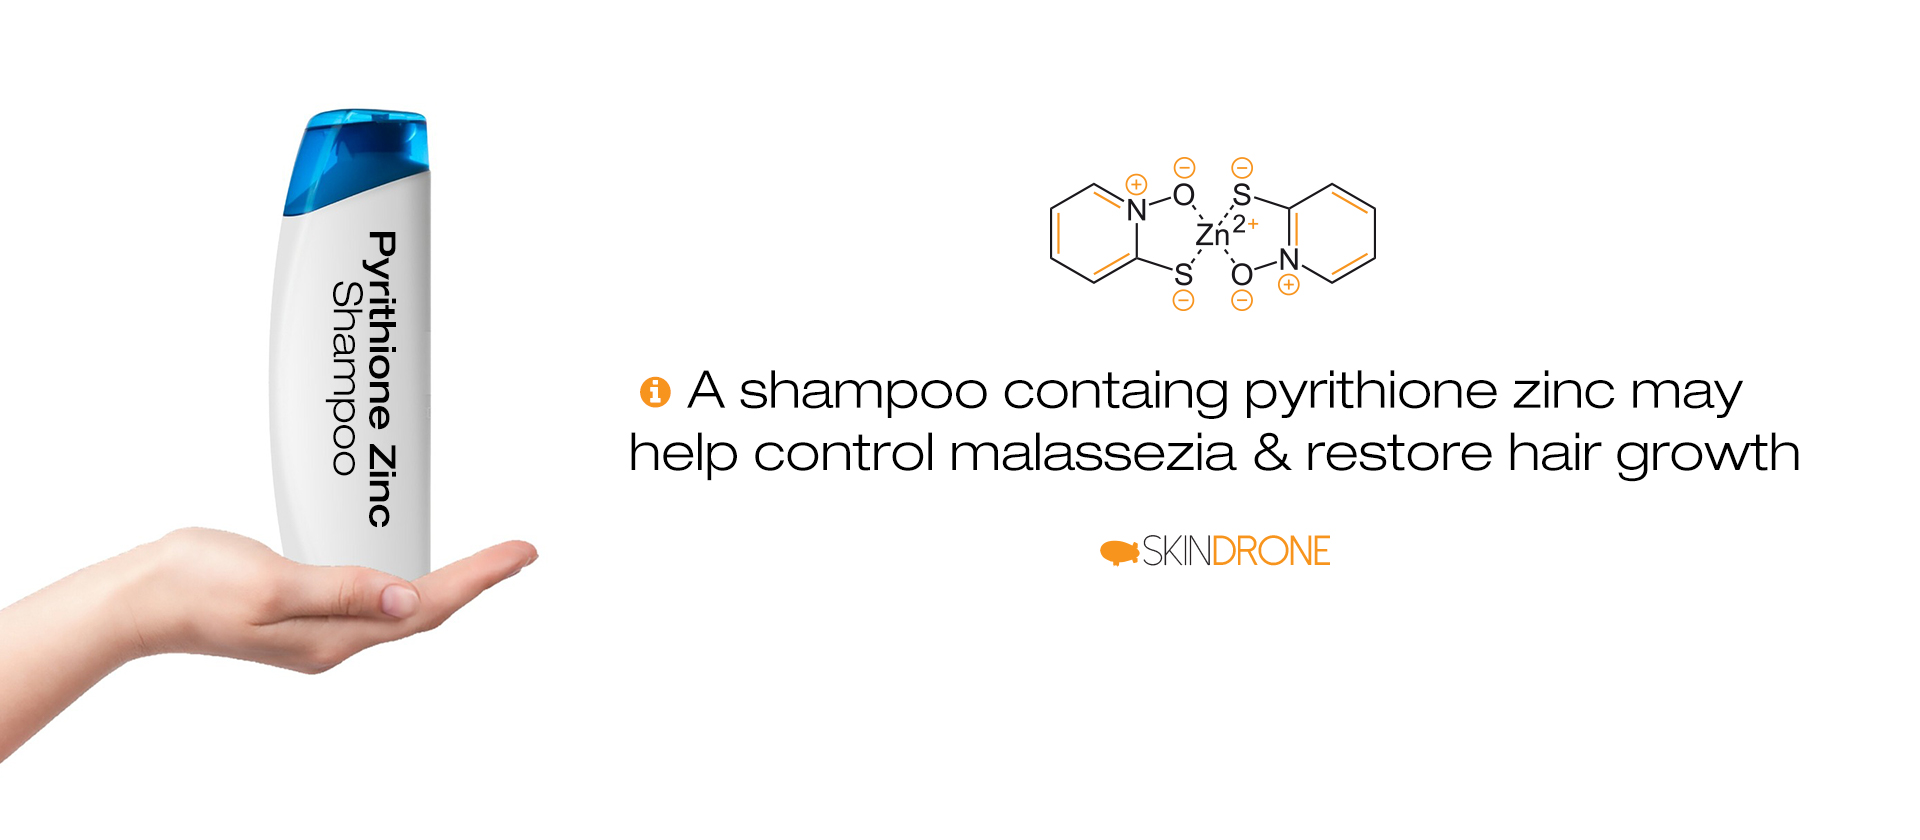 A shampoo containing pyrithione zinc may help control malassezia and restore hair grwoth